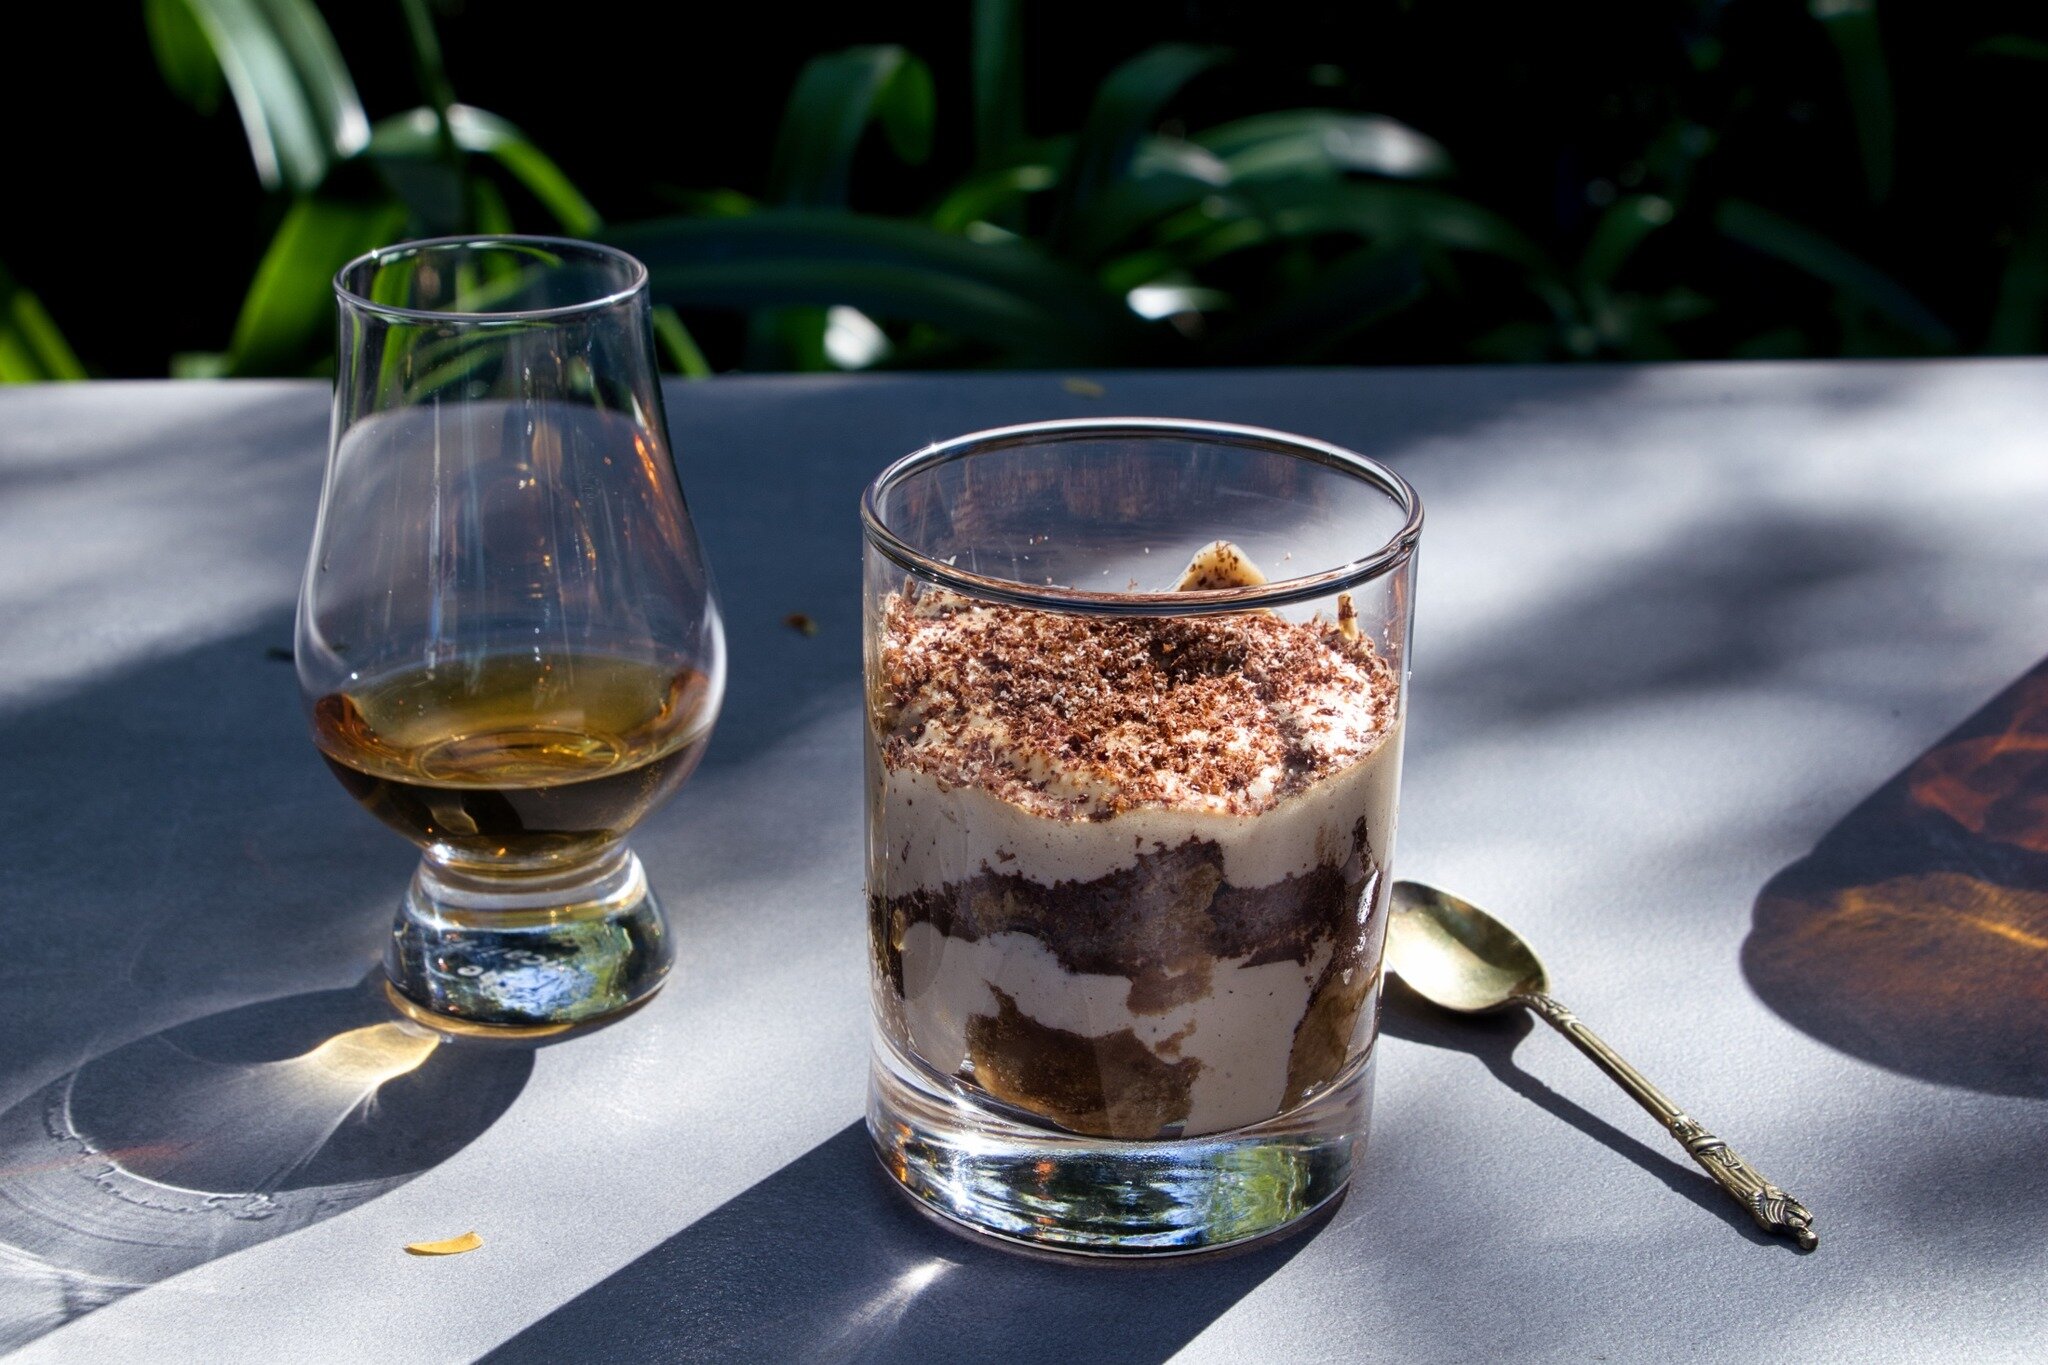 Looking for the ultimate Christmas dessert?

Let me share my favourite with you.

For me, tiramisu is the pinnacle of what a good dessert should be;  it is rich and airy, creamy and decadent, bitter and sweet. The little kick of alcohol cuts through 